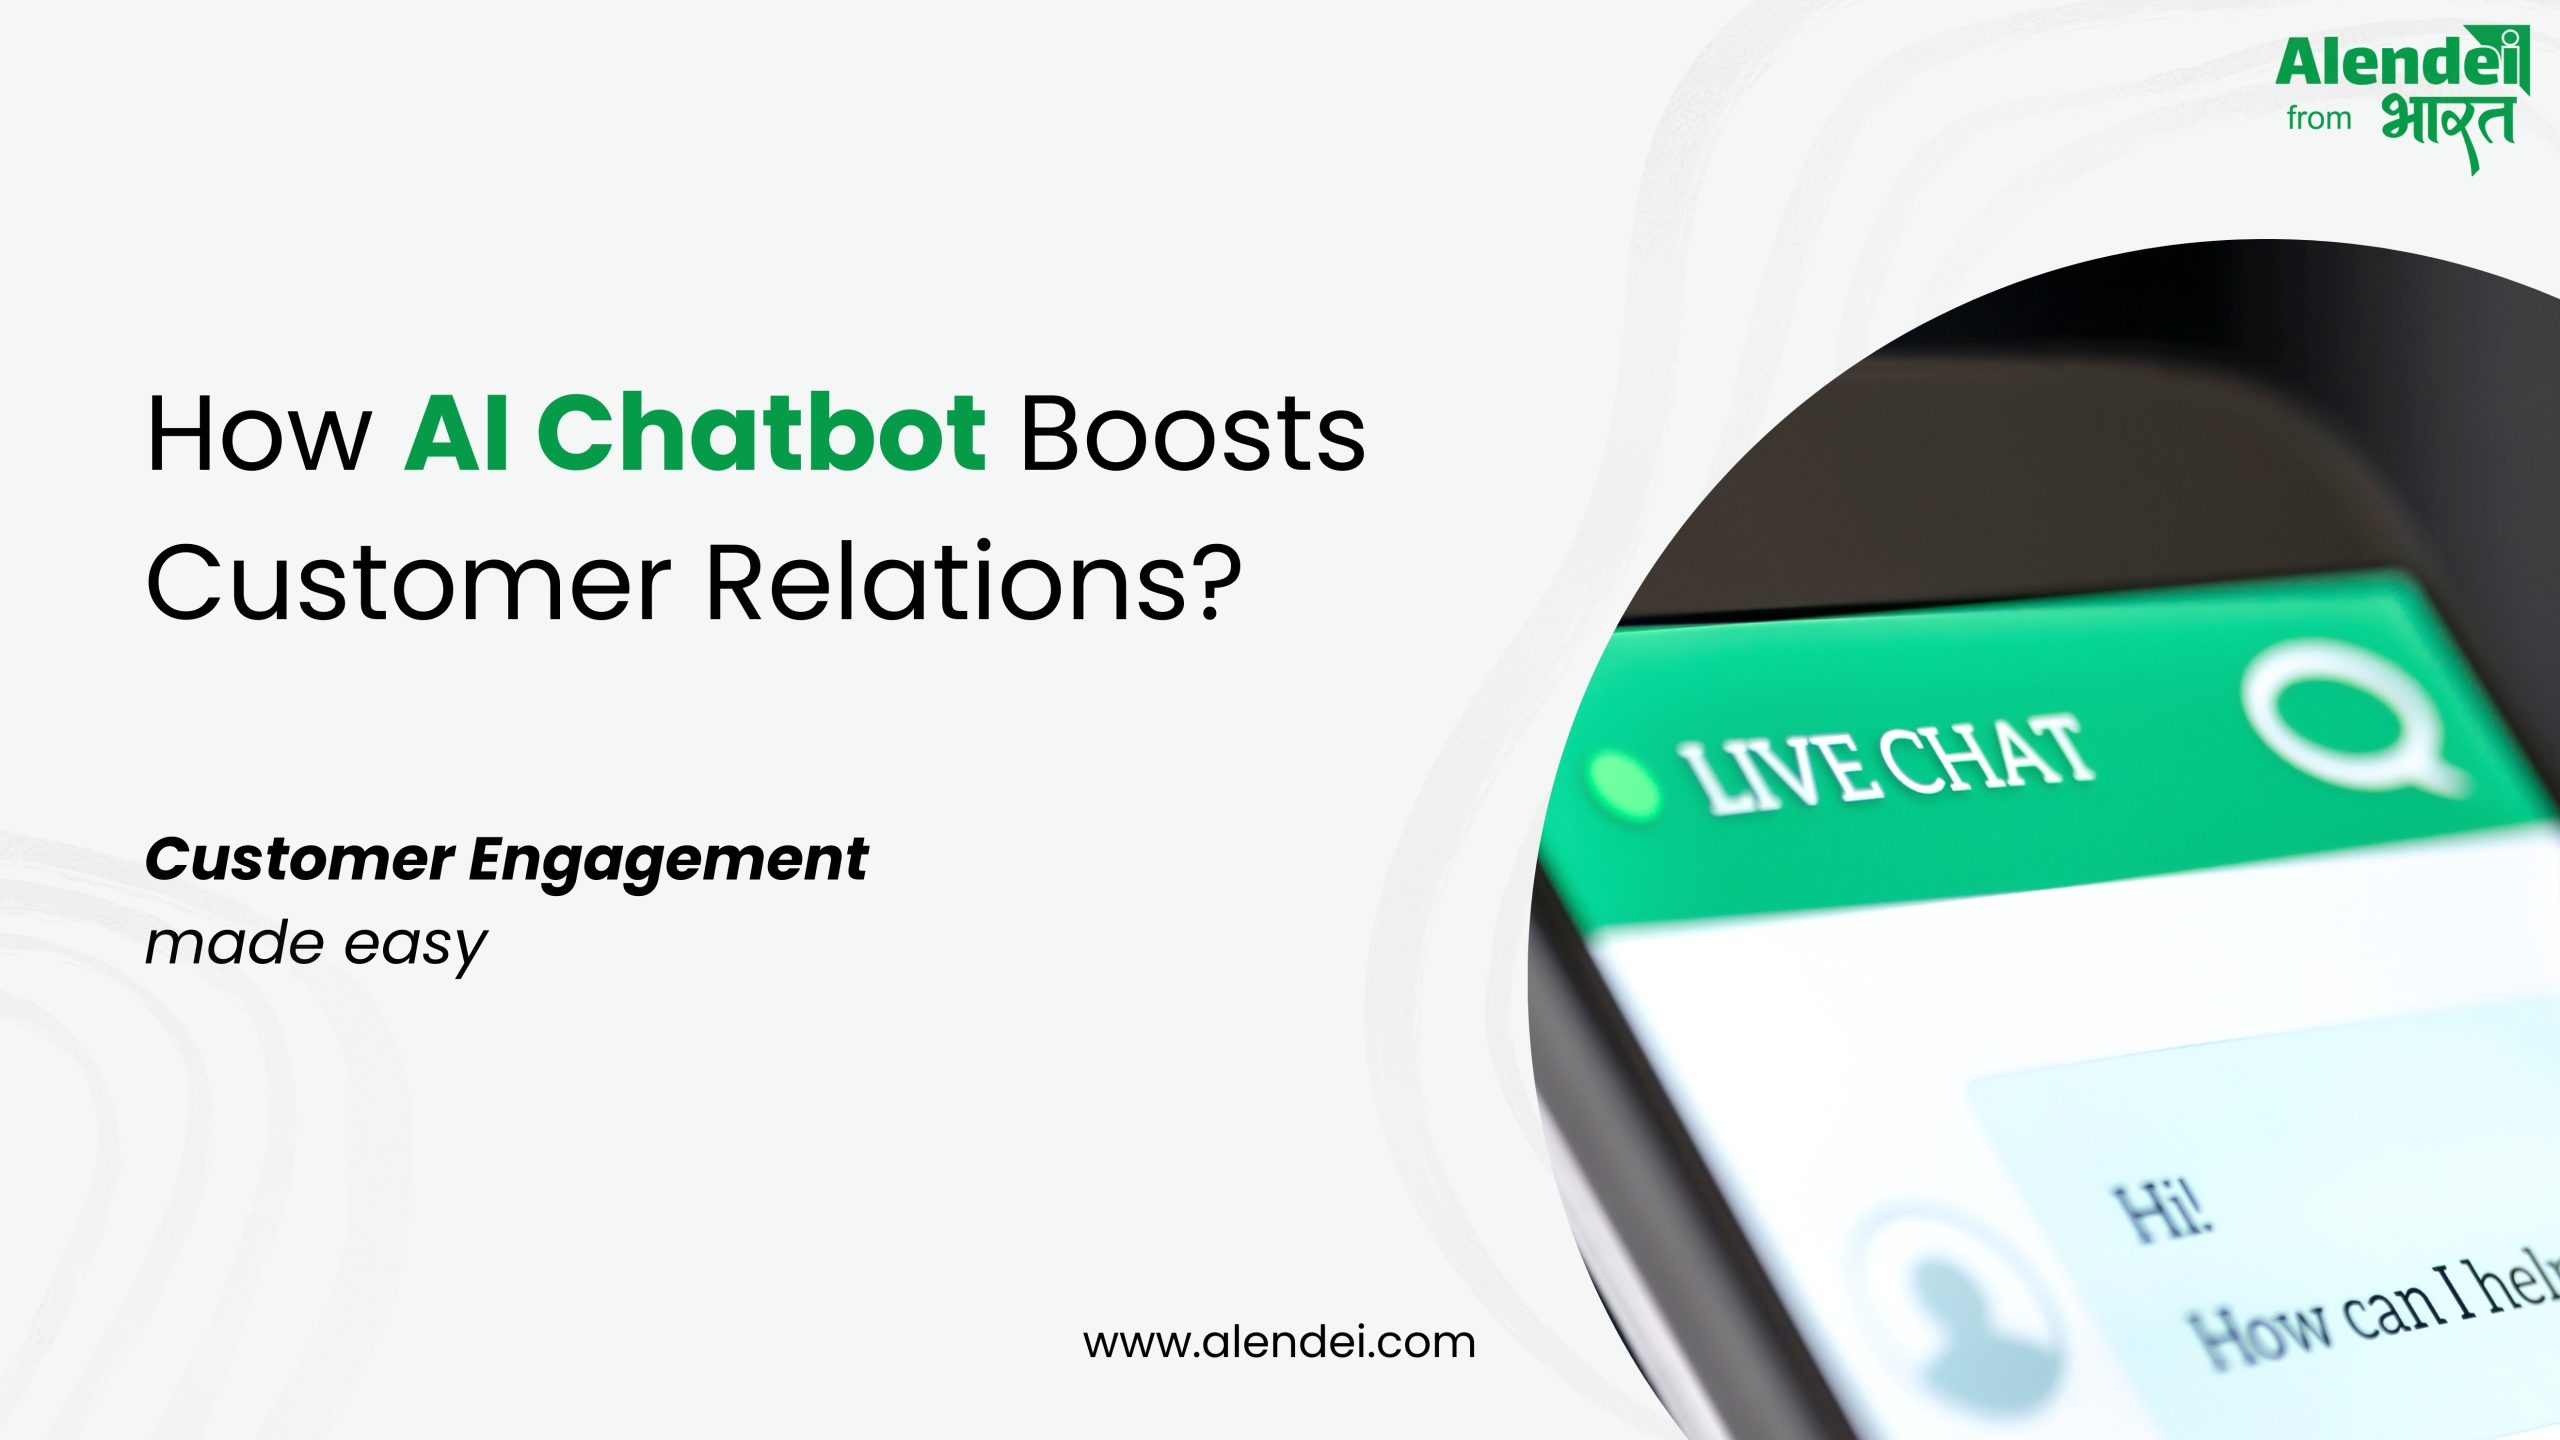 AI chatbot helps in customer engagement